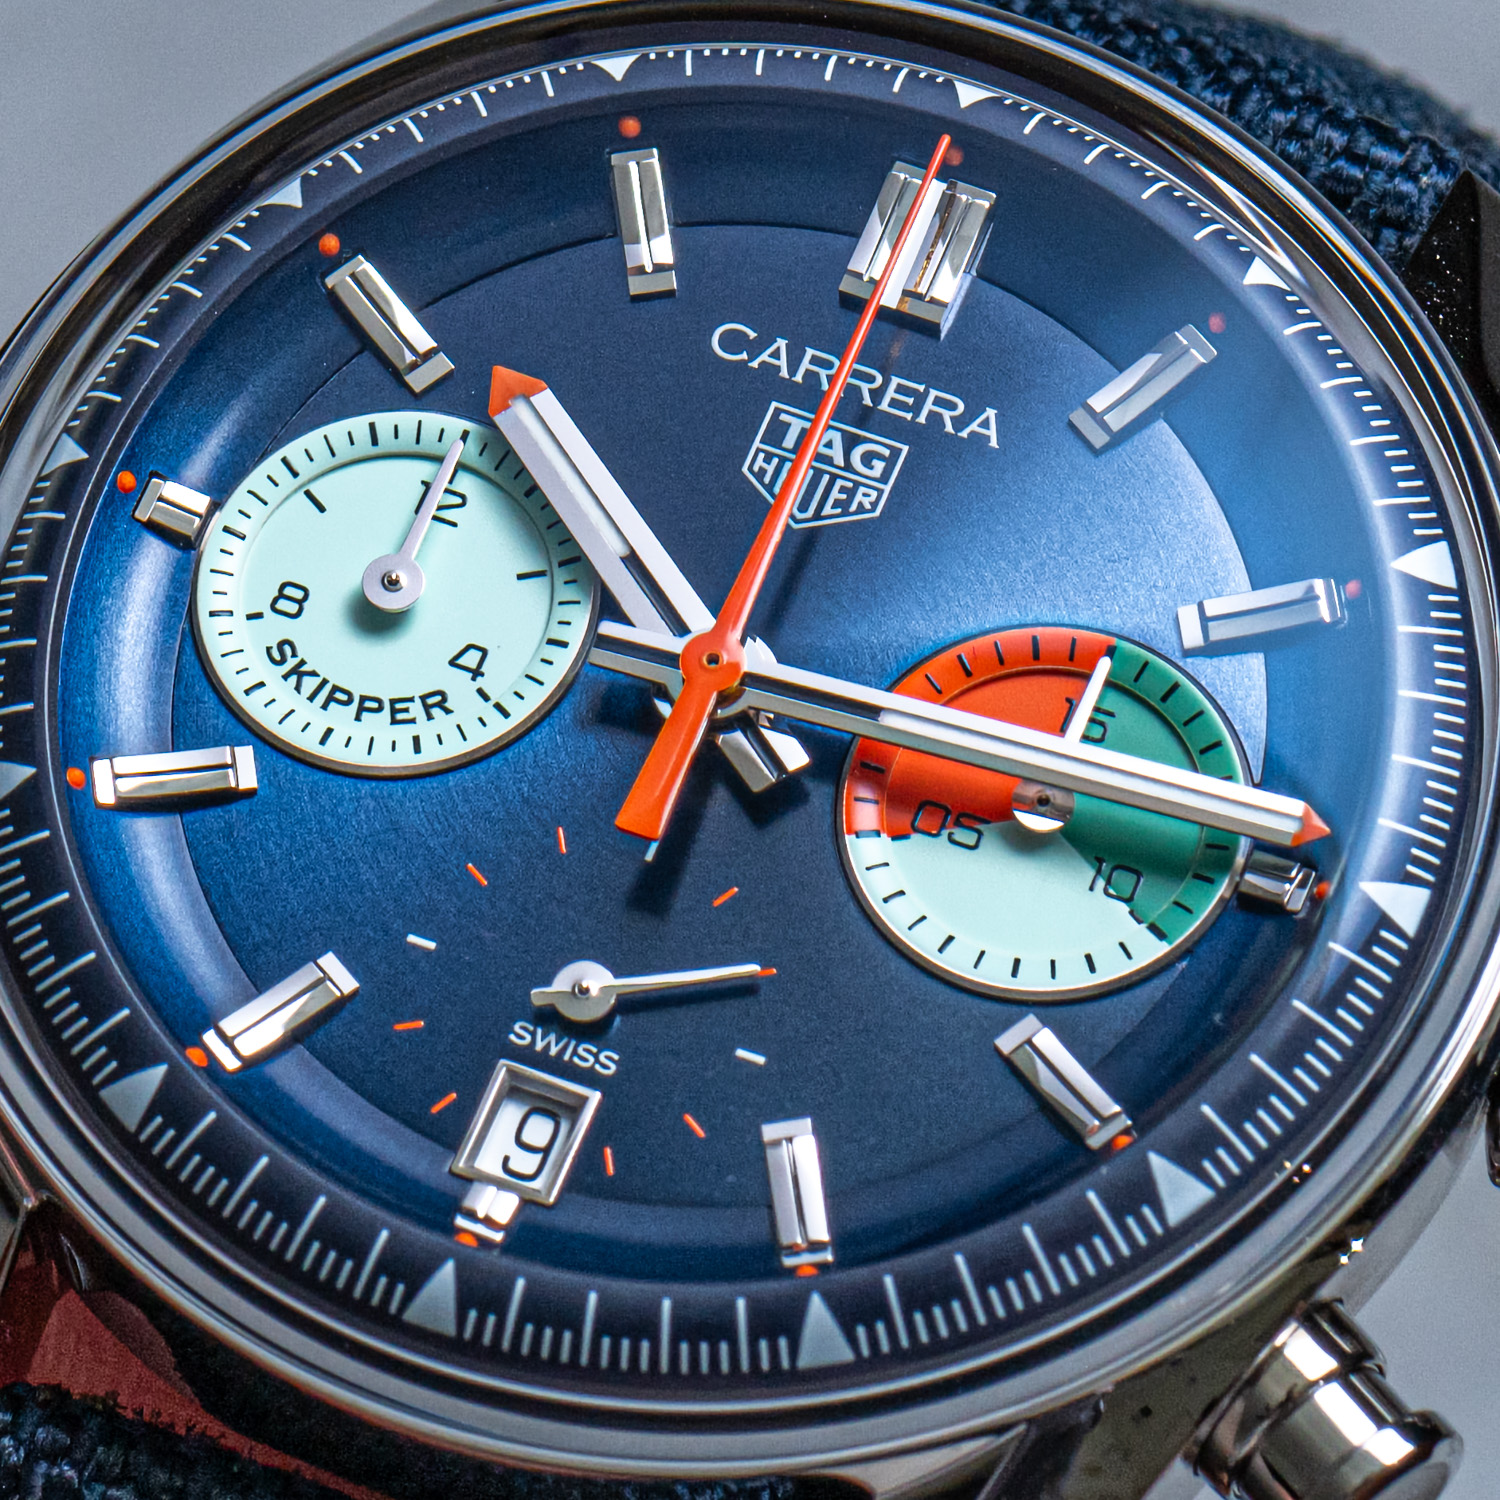 Recalling 1969, TAG Heuer Introduces the Carrera Skipper (with